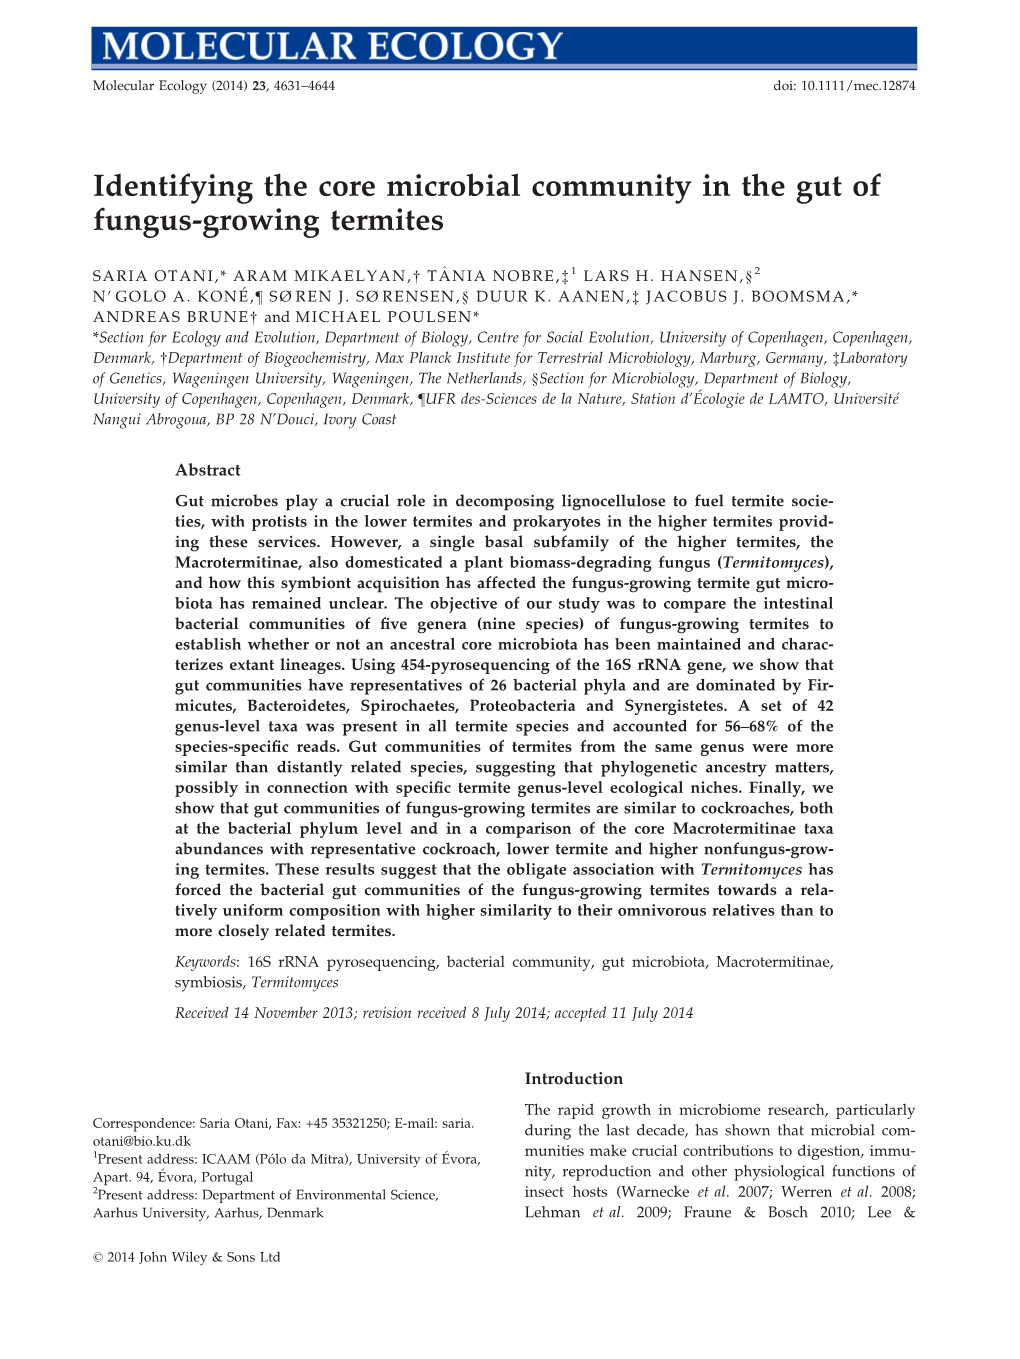 Identifying the Core Microbial Community in the Gut of Fungus-Growing Termites